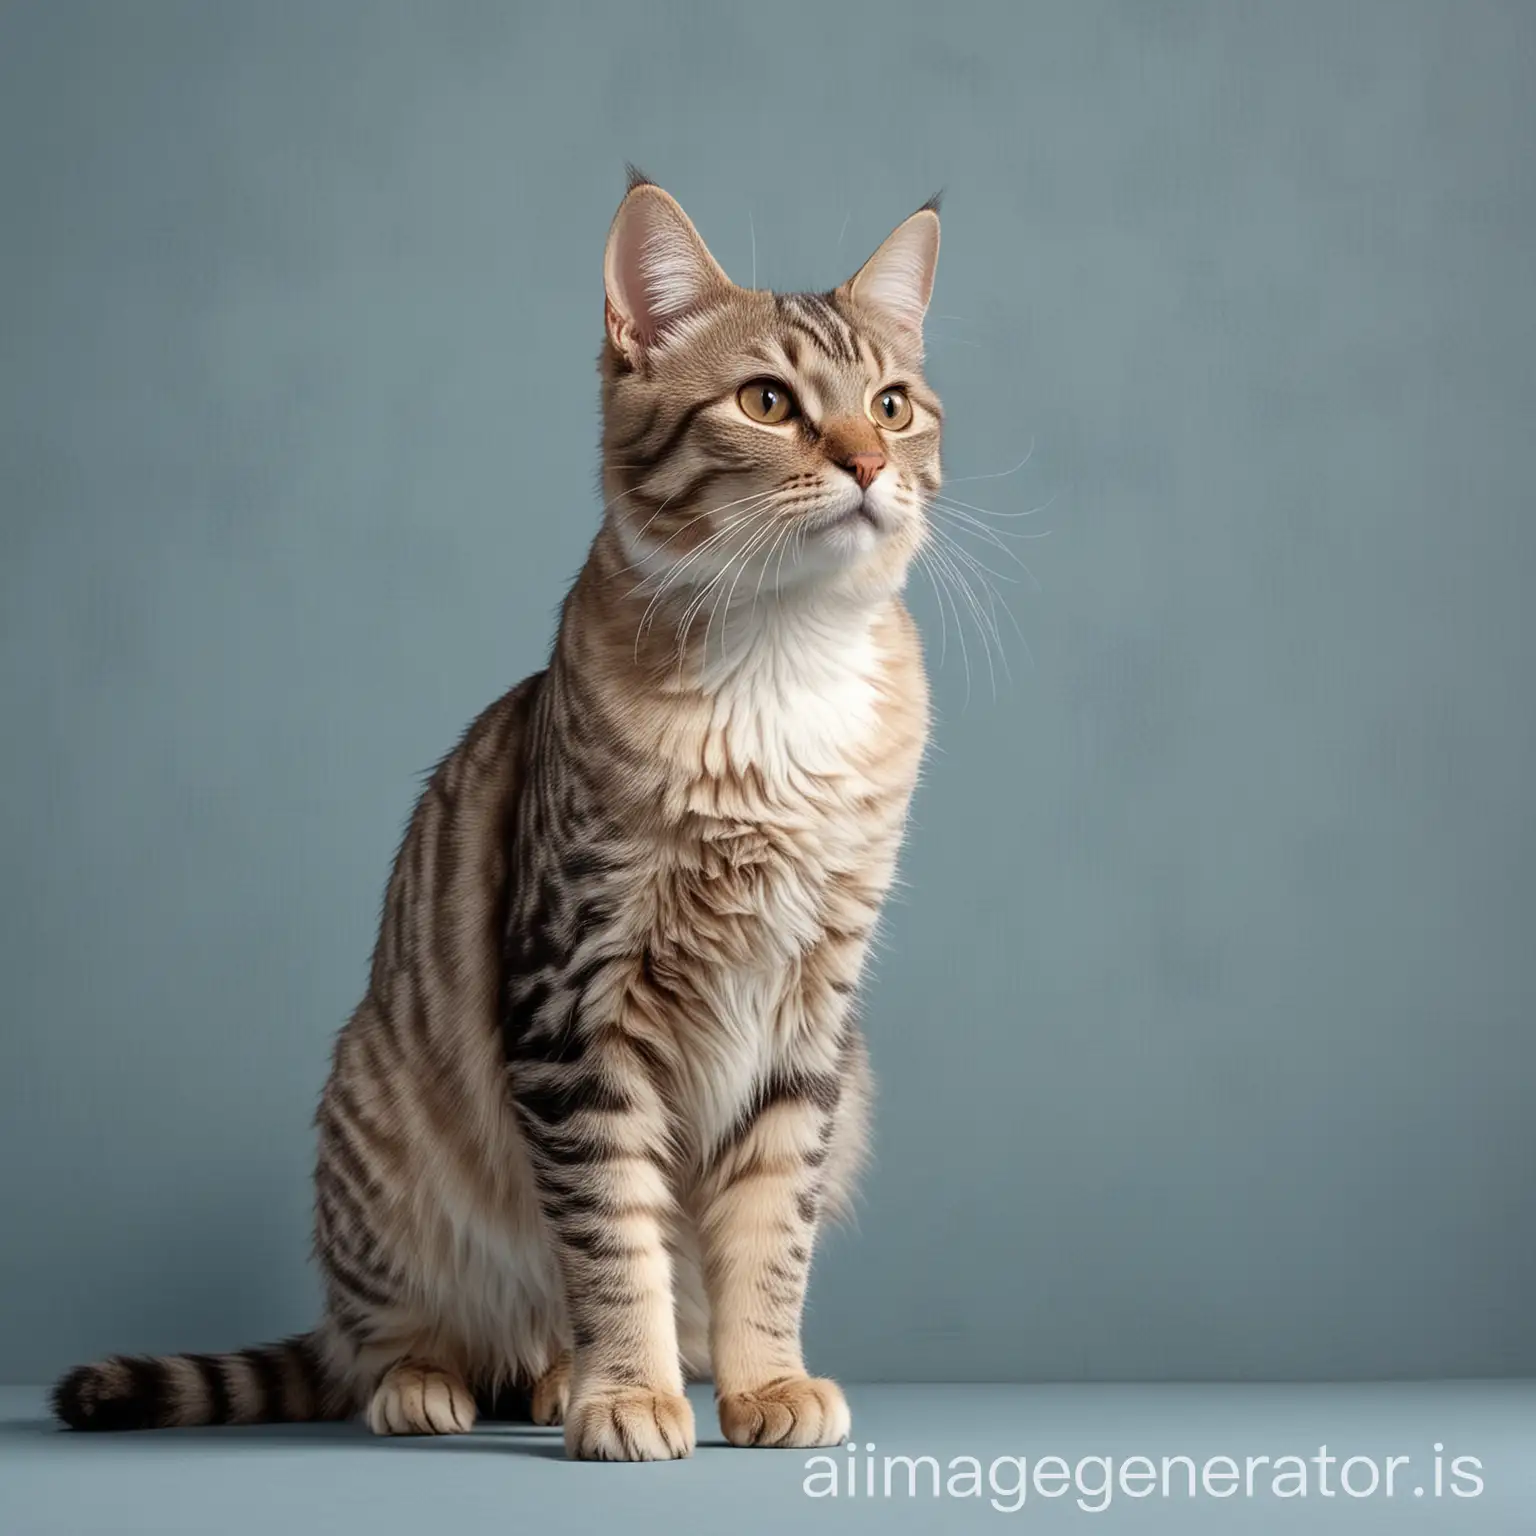 american bobtail cat standing against a sky blue wall with a greyish shade. the image sholud be of width 330px and height 300px.the image should be realistic and more rendering
 